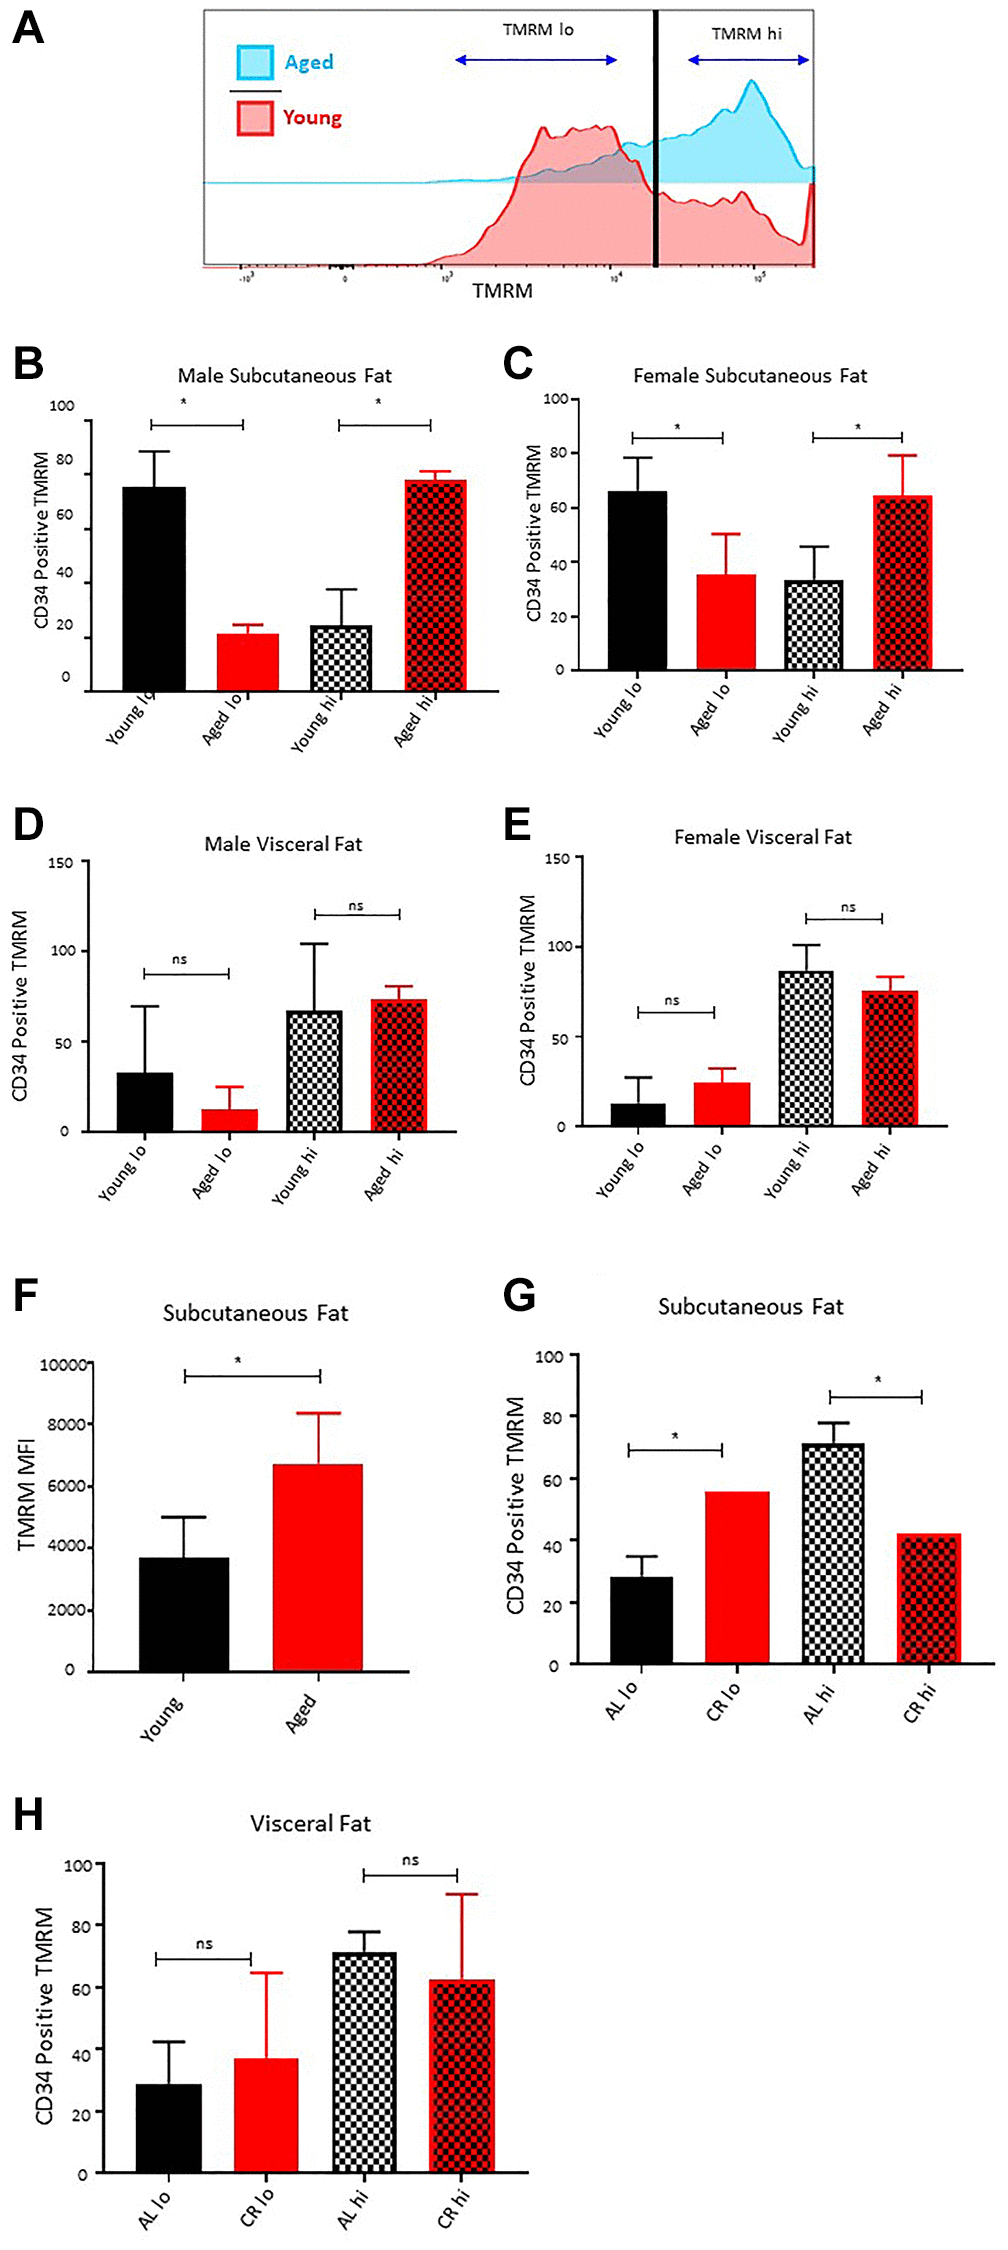 Effect of age on ASCs quiescence. (A) Representative histogram of TMRM staining in subcutaneous ASCs from young and aged mice. (B, C) Percentage of TMRM lo and TMRM hi ASCs in subcutaneous adipose tissue of young and aged male (B) and female (C) mice. (D, E) Percentage of TMRM lo and TMRM hi ASCs in visceral adipose tissue of young and aged male (D) and female (E) mice. (F) Mean fluorescence intensity of TMRM in young and aged ASCs. (G, H) Percentage of TMRM lo and TMRM hi ASCs in subcutaneous (G) and visceral (H) adipose tissue of mice fed on caloric restricted (CR) and ad-libitum (AL) diet. (n = 3–5 mice per group) P-value *, ns = non-significant.